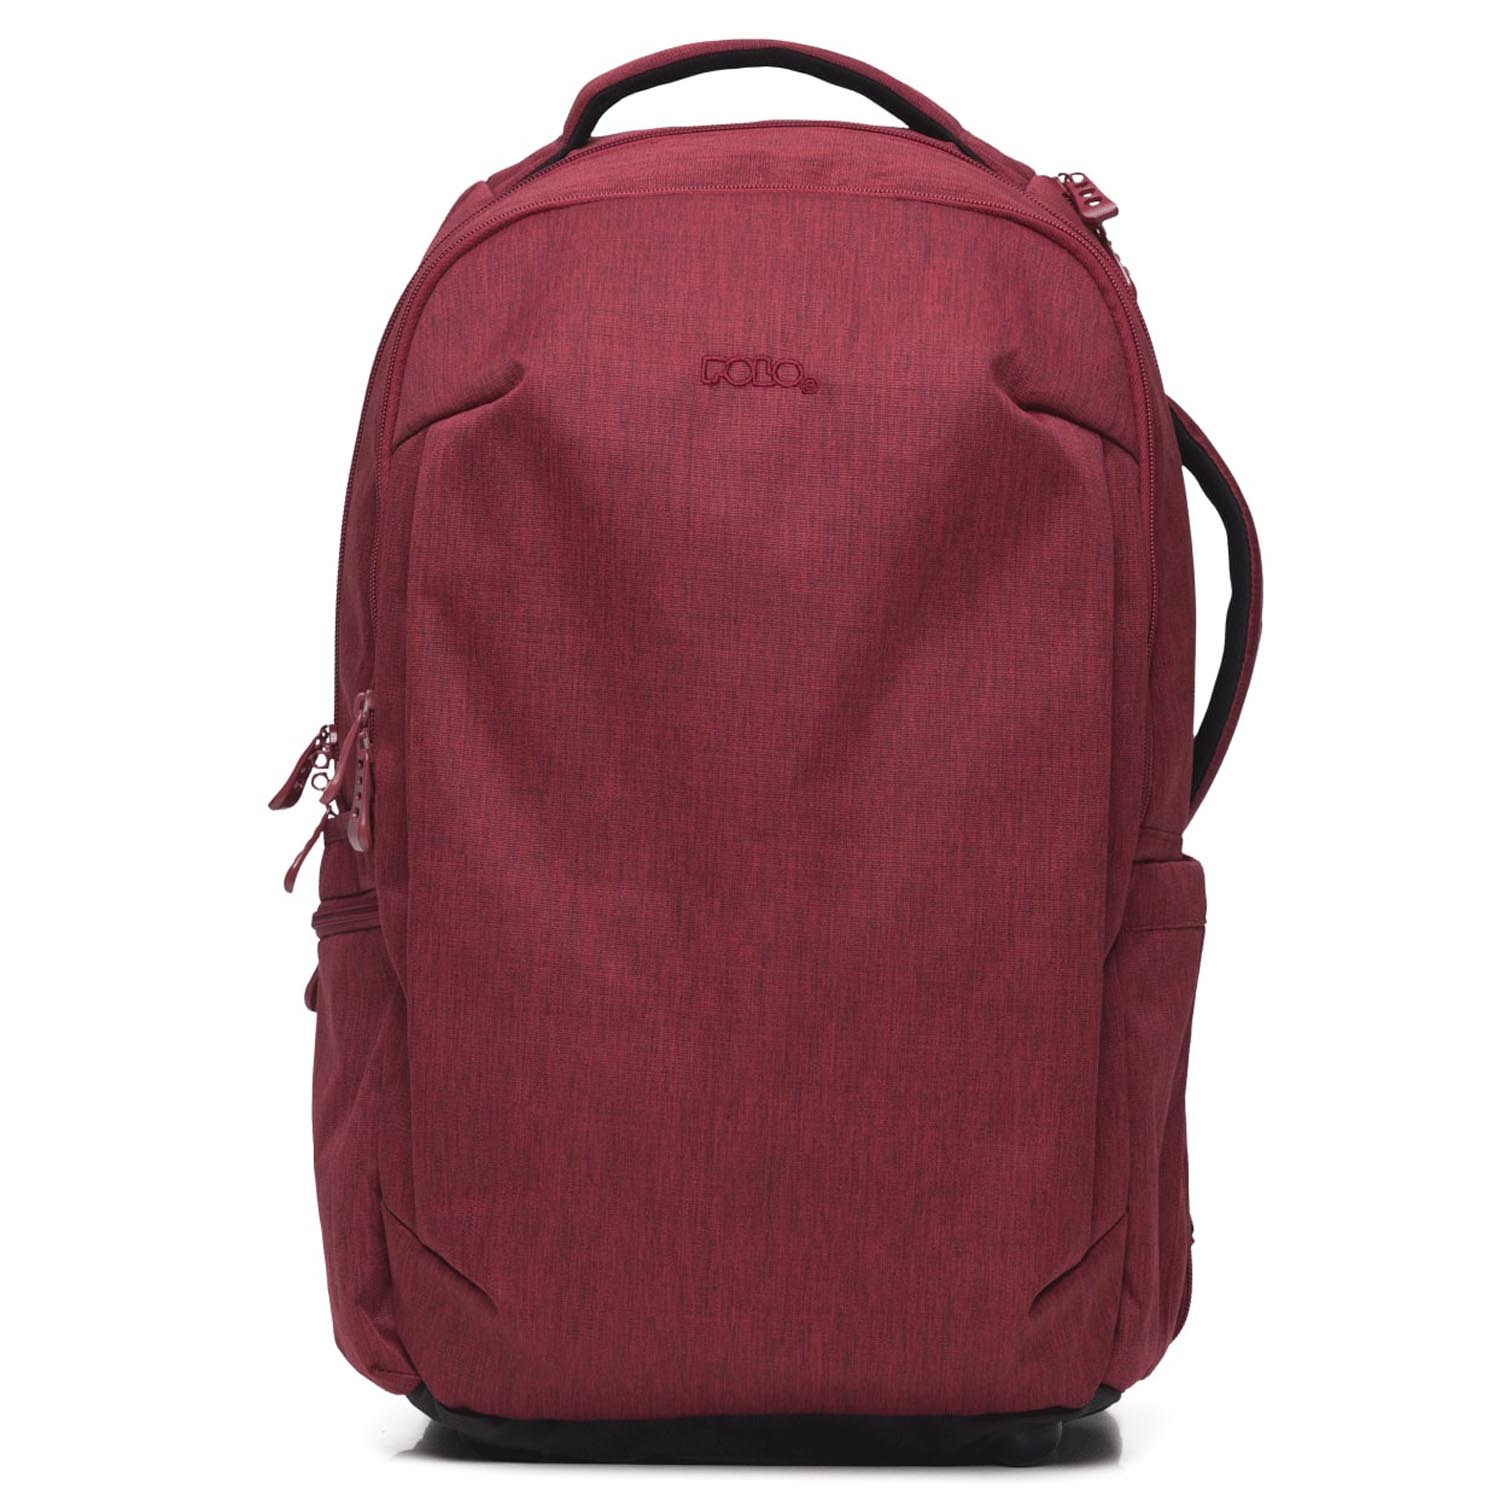 polo stric backpack red 902021 3000